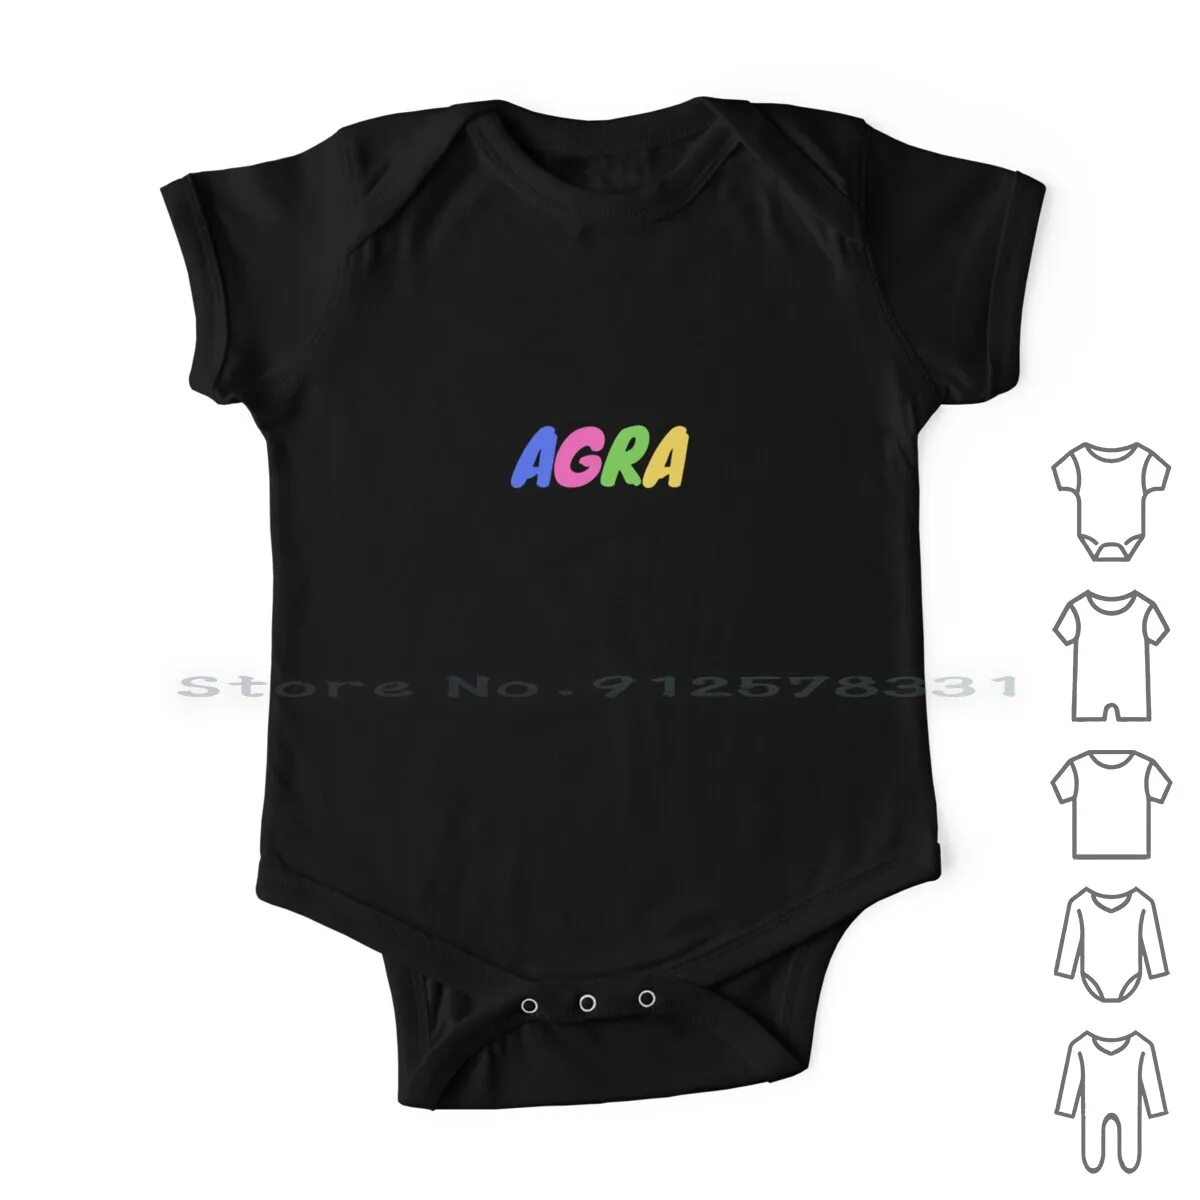 

Agra Newborn Baby Clothes Rompers Cotton Jumpsuits Agra Colorful Text Rainbow Colors Popular Cities Indian Capital City Text